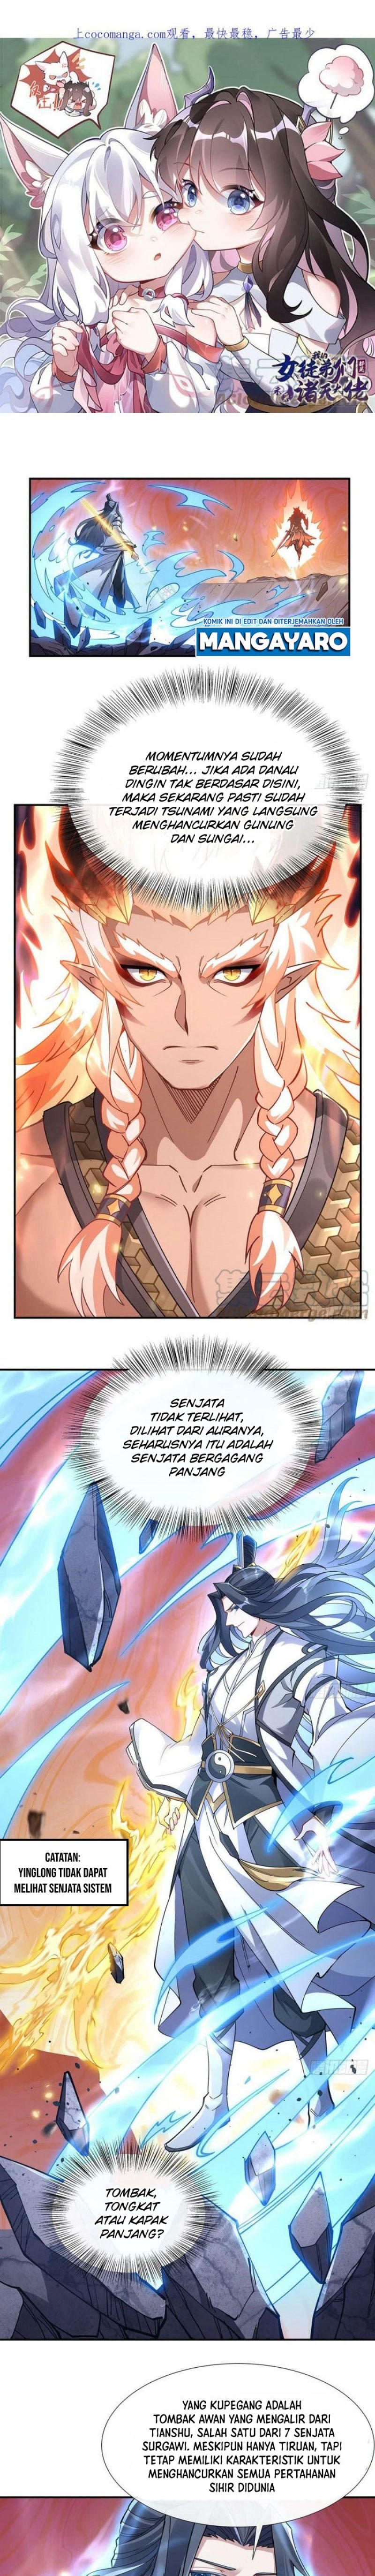 Dilarang COPAS - situs resmi www.mangacanblog.com - Komik my female apprentices are all big shots from the future 141 - chapter 141 142 Indonesia my female apprentices are all big shots from the future 141 - chapter 141 Terbaru 3|Baca Manga Komik Indonesia|Mangacan